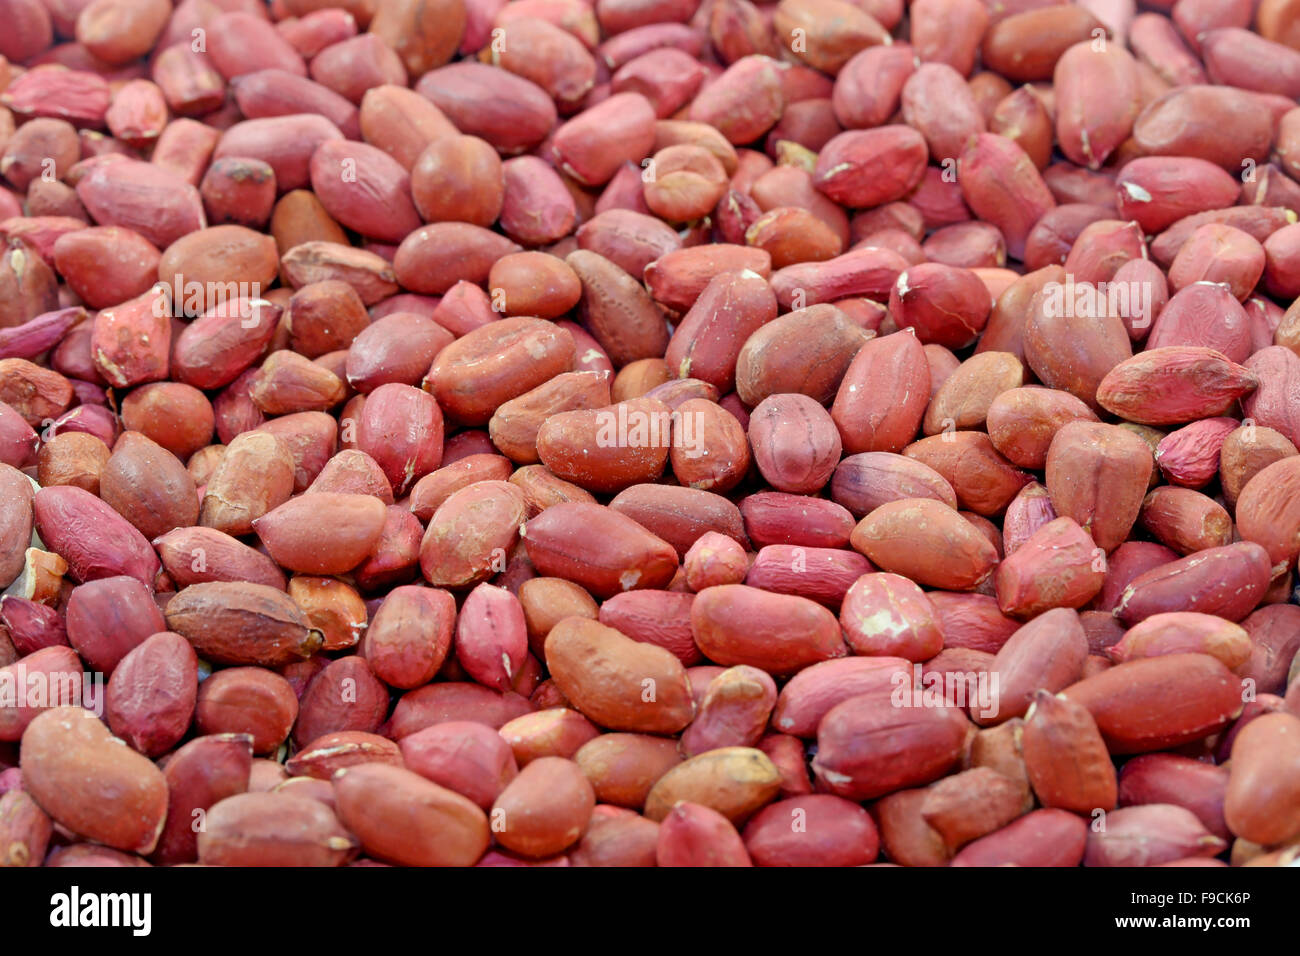 Tasty nuts peanuts a photographed close up Stock Photo